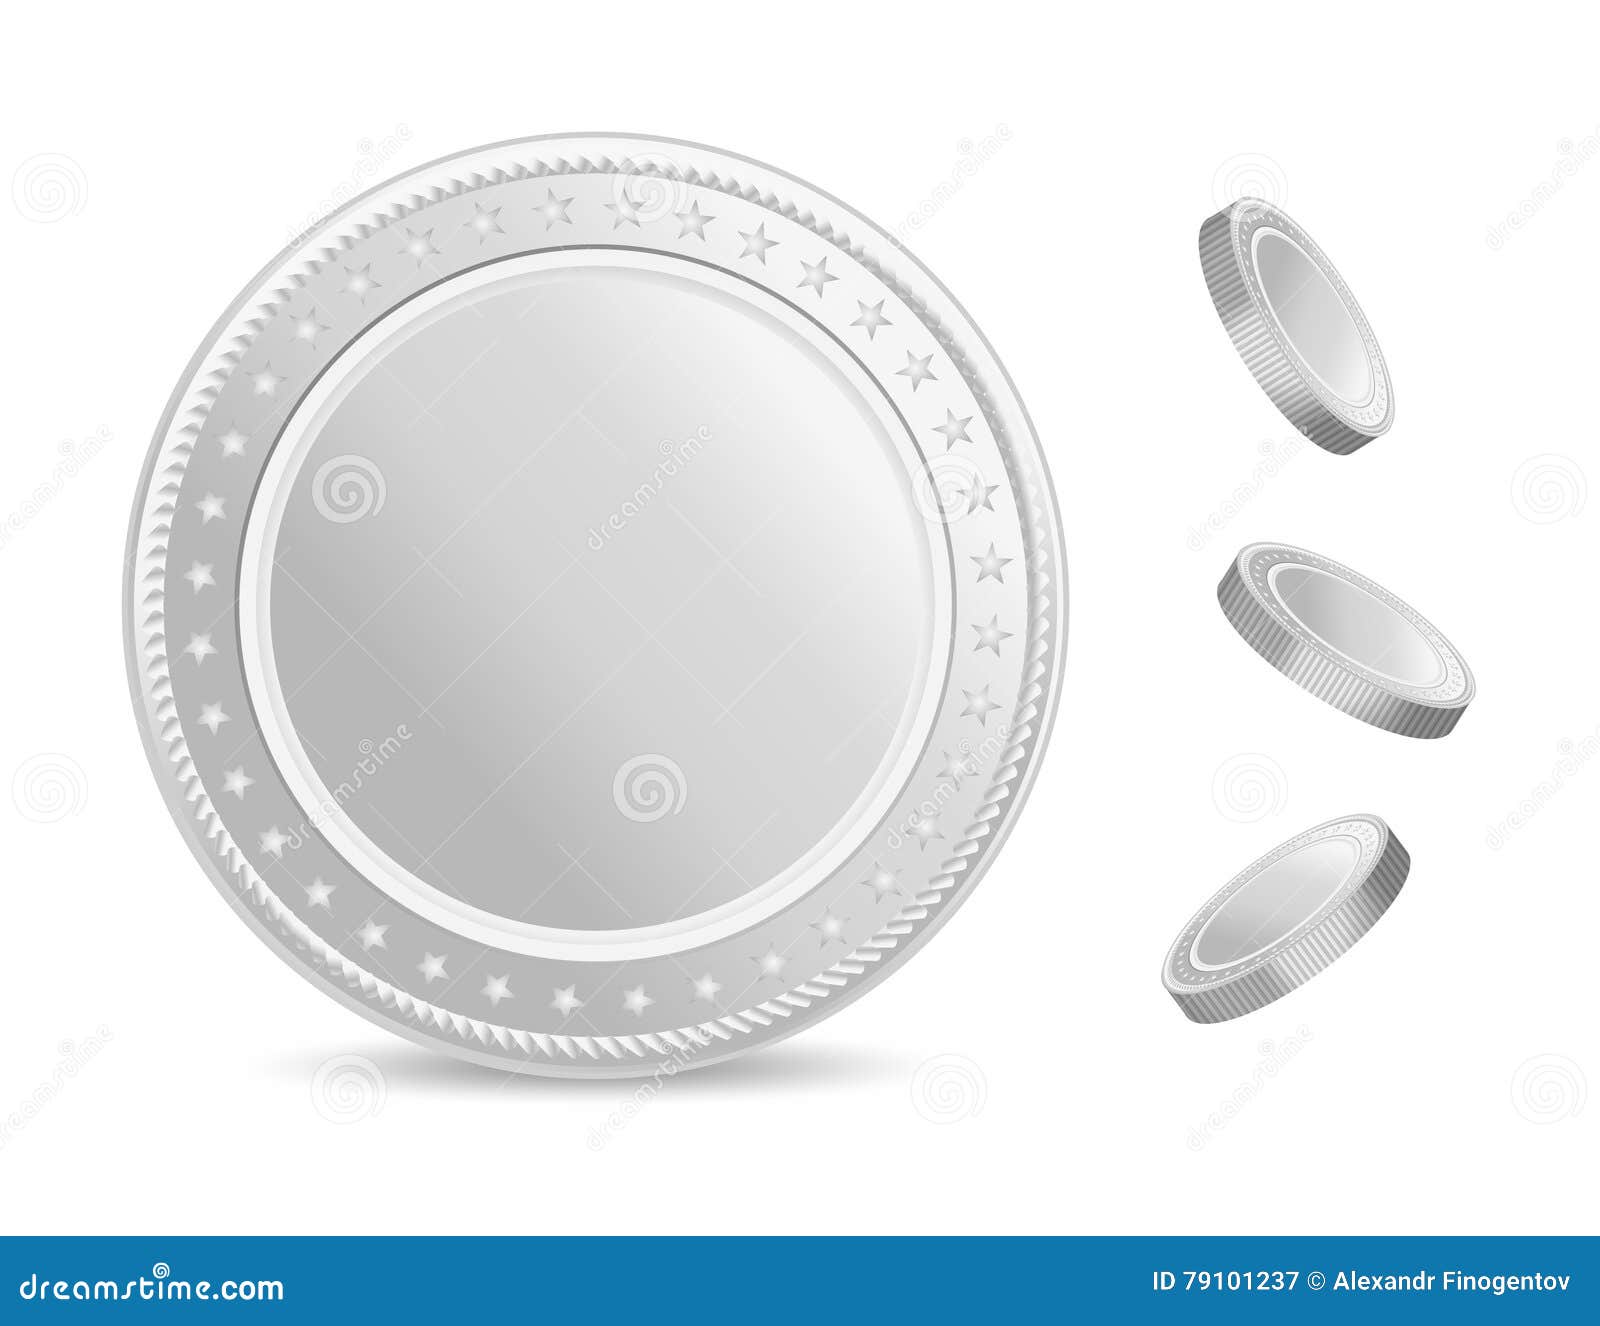 Realistic Silver Coins Vector Set. Blank Coin with Shadow. Front View ...